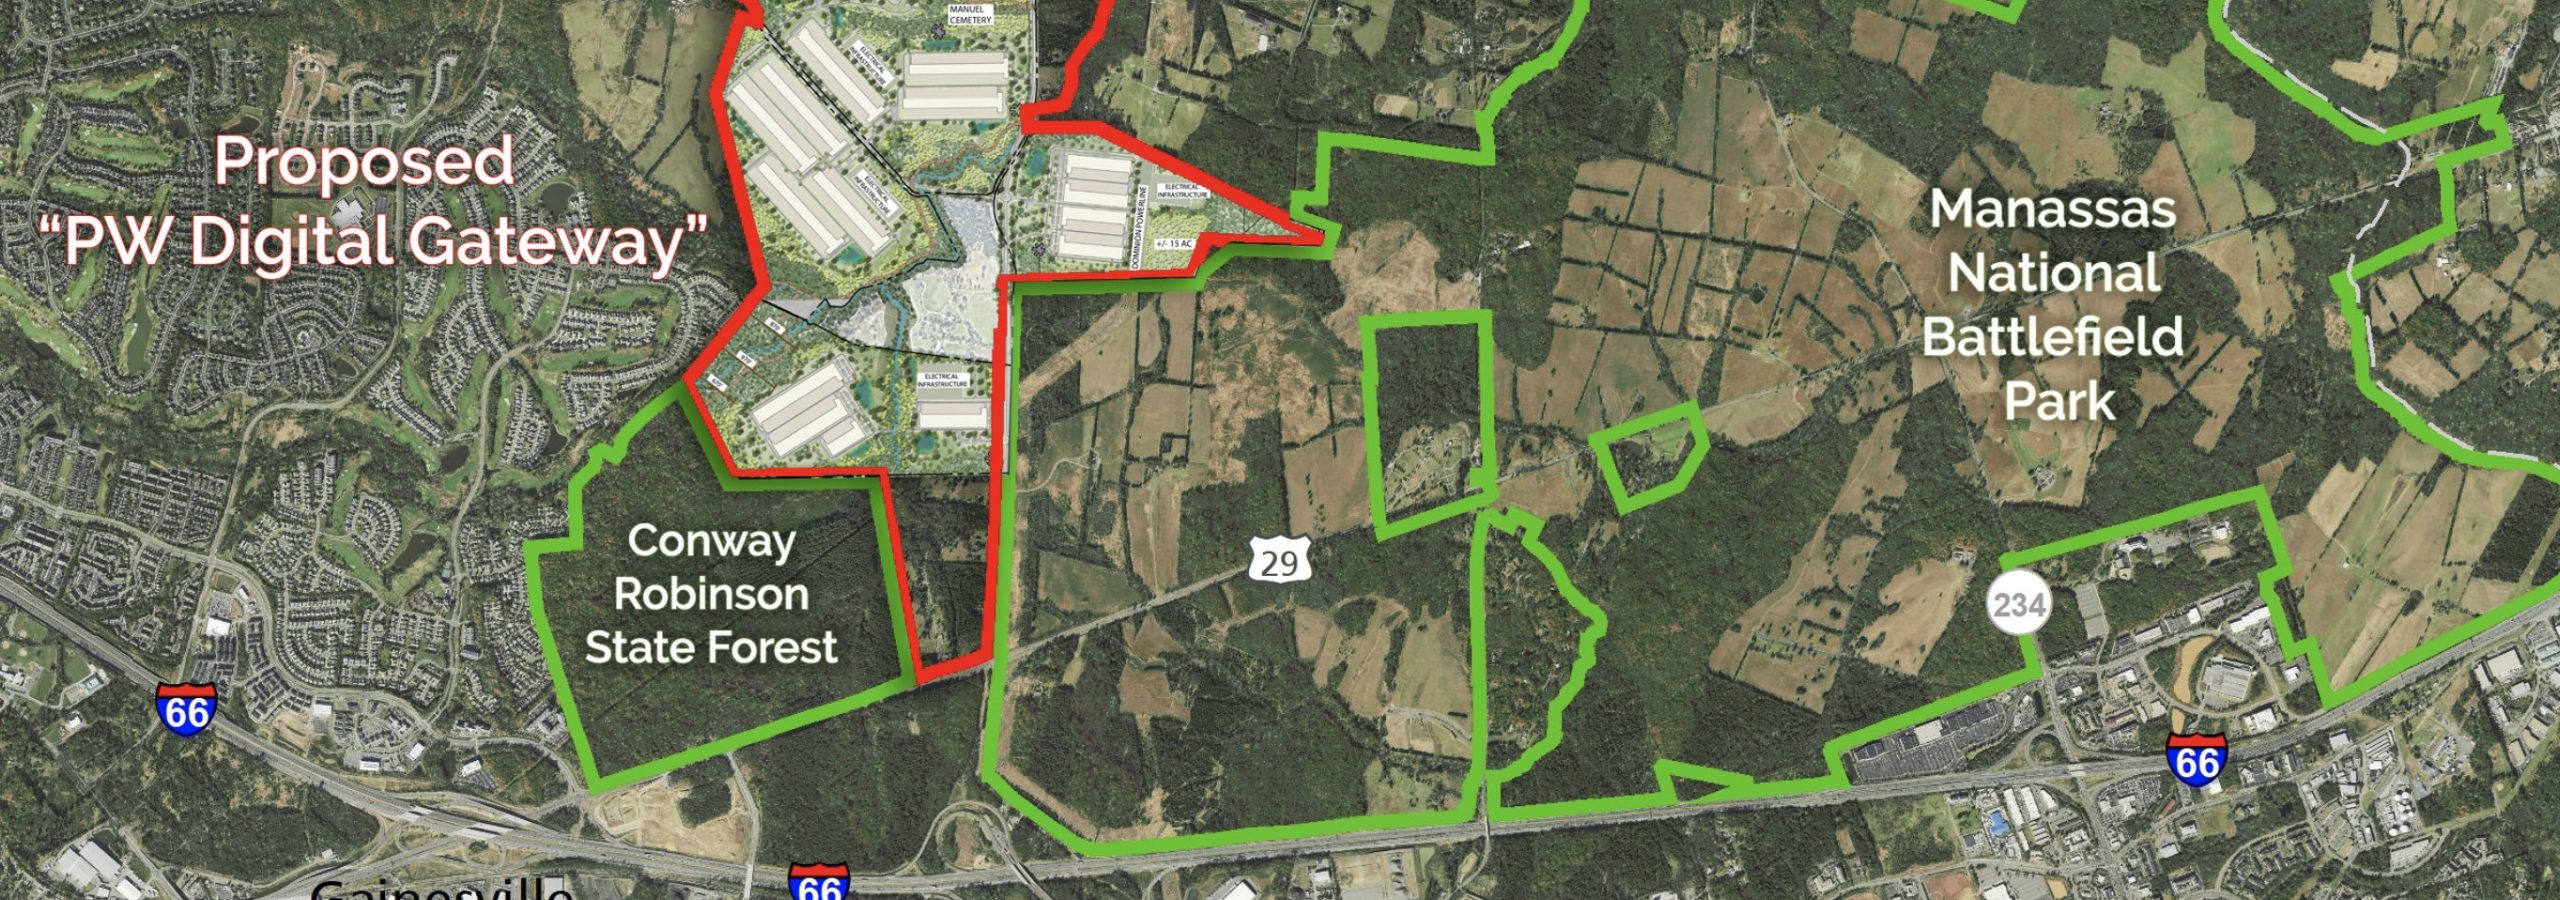 This is a map showing the location of the data center development in relation to houses on the west, a state forest on the southwest, and Manassas National Battlefield Park on the east and south.